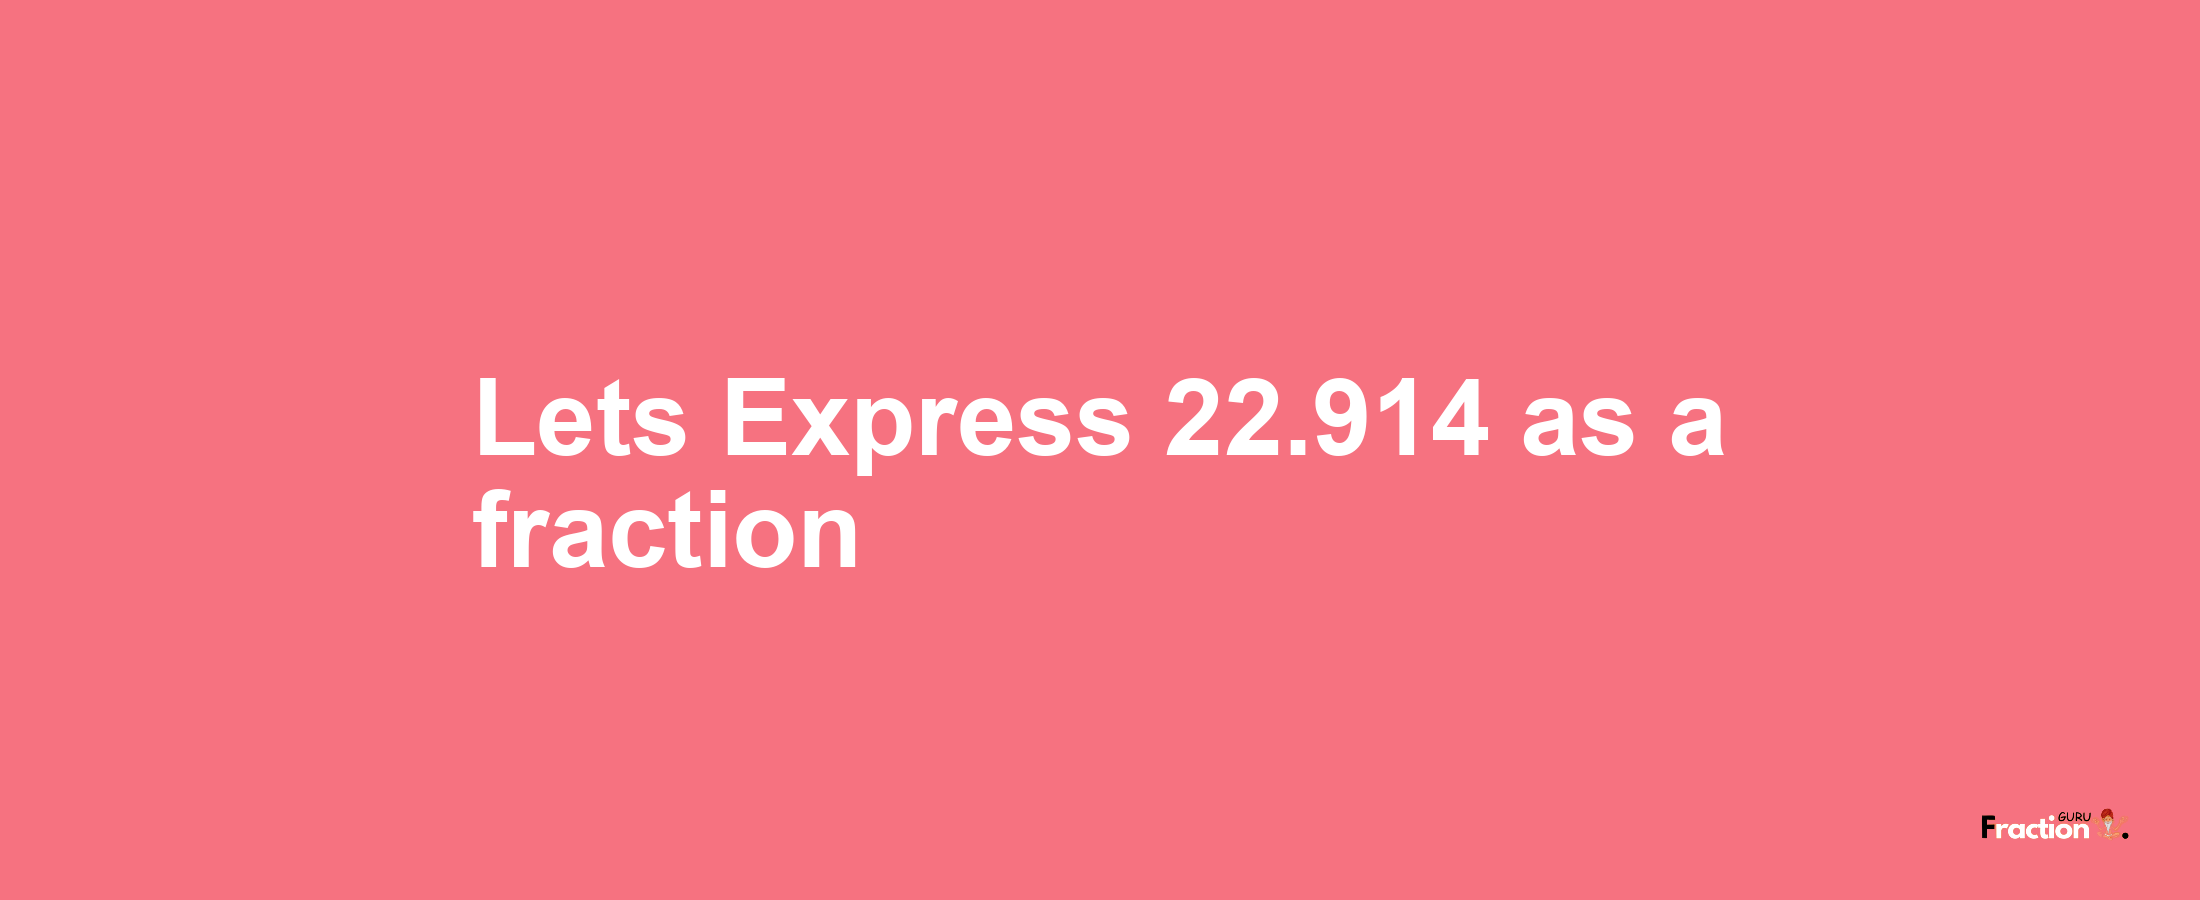 Lets Express 22.914 as afraction